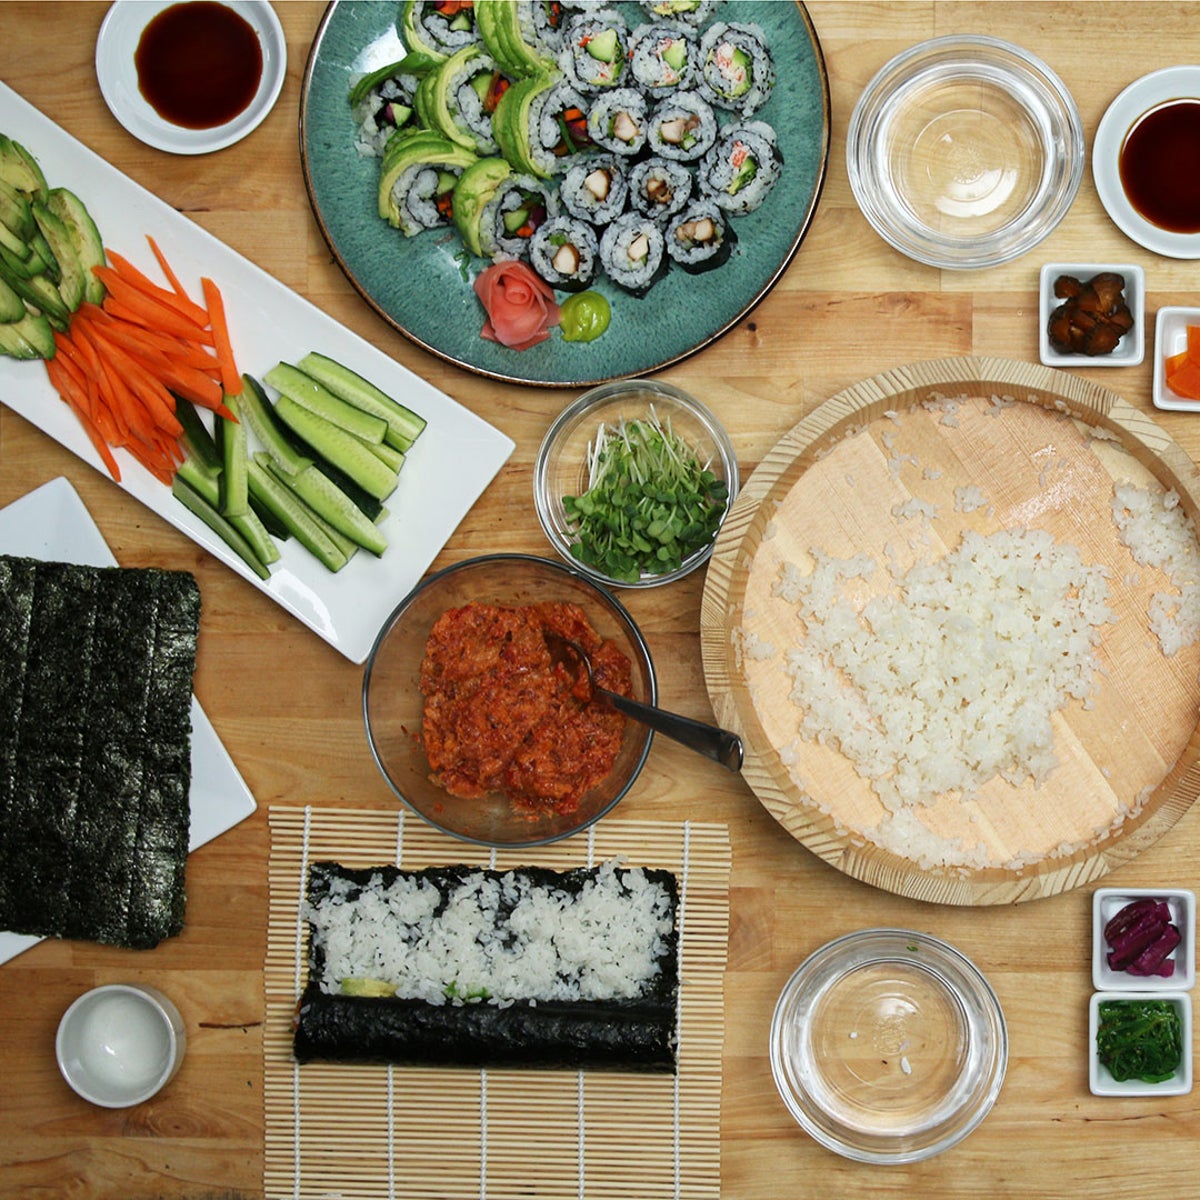 How to make easy sushi at home: Throw a hand roll party - Los Angeles Times